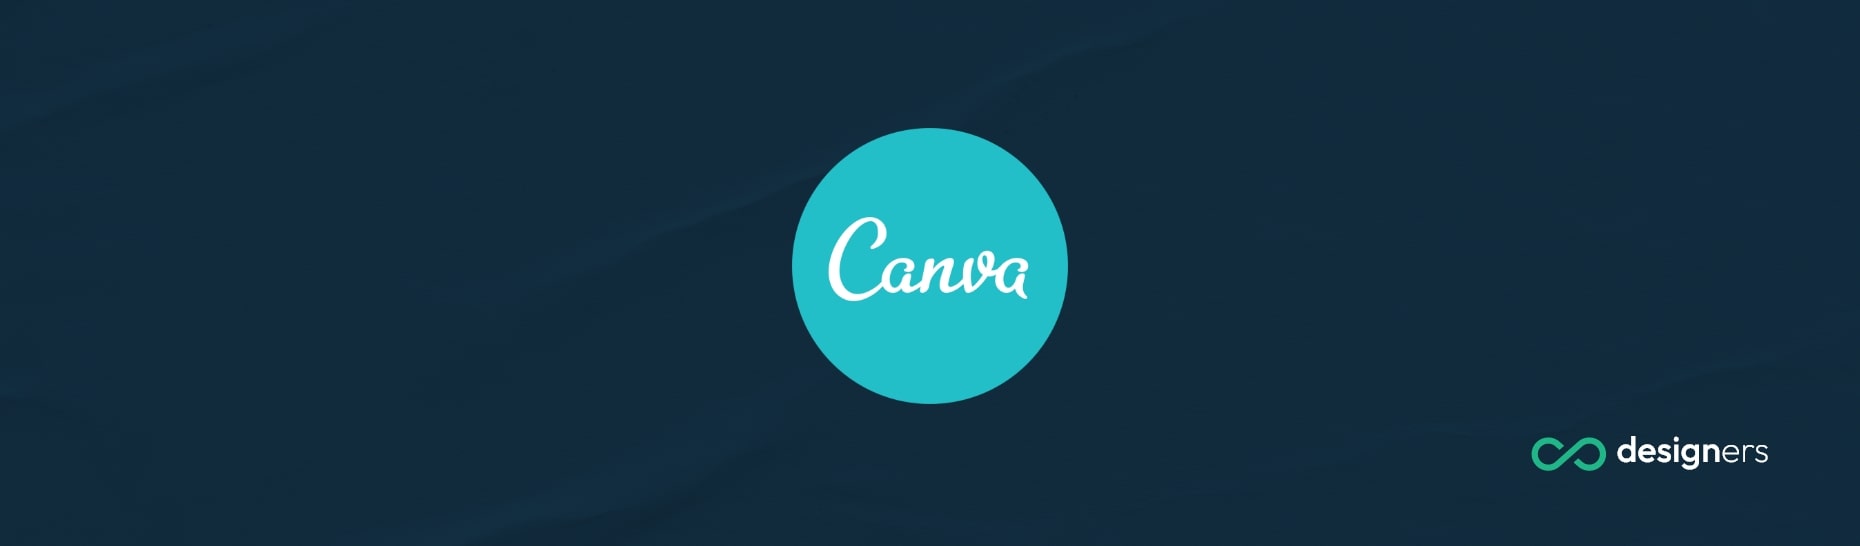 What Made Canva So Successful?